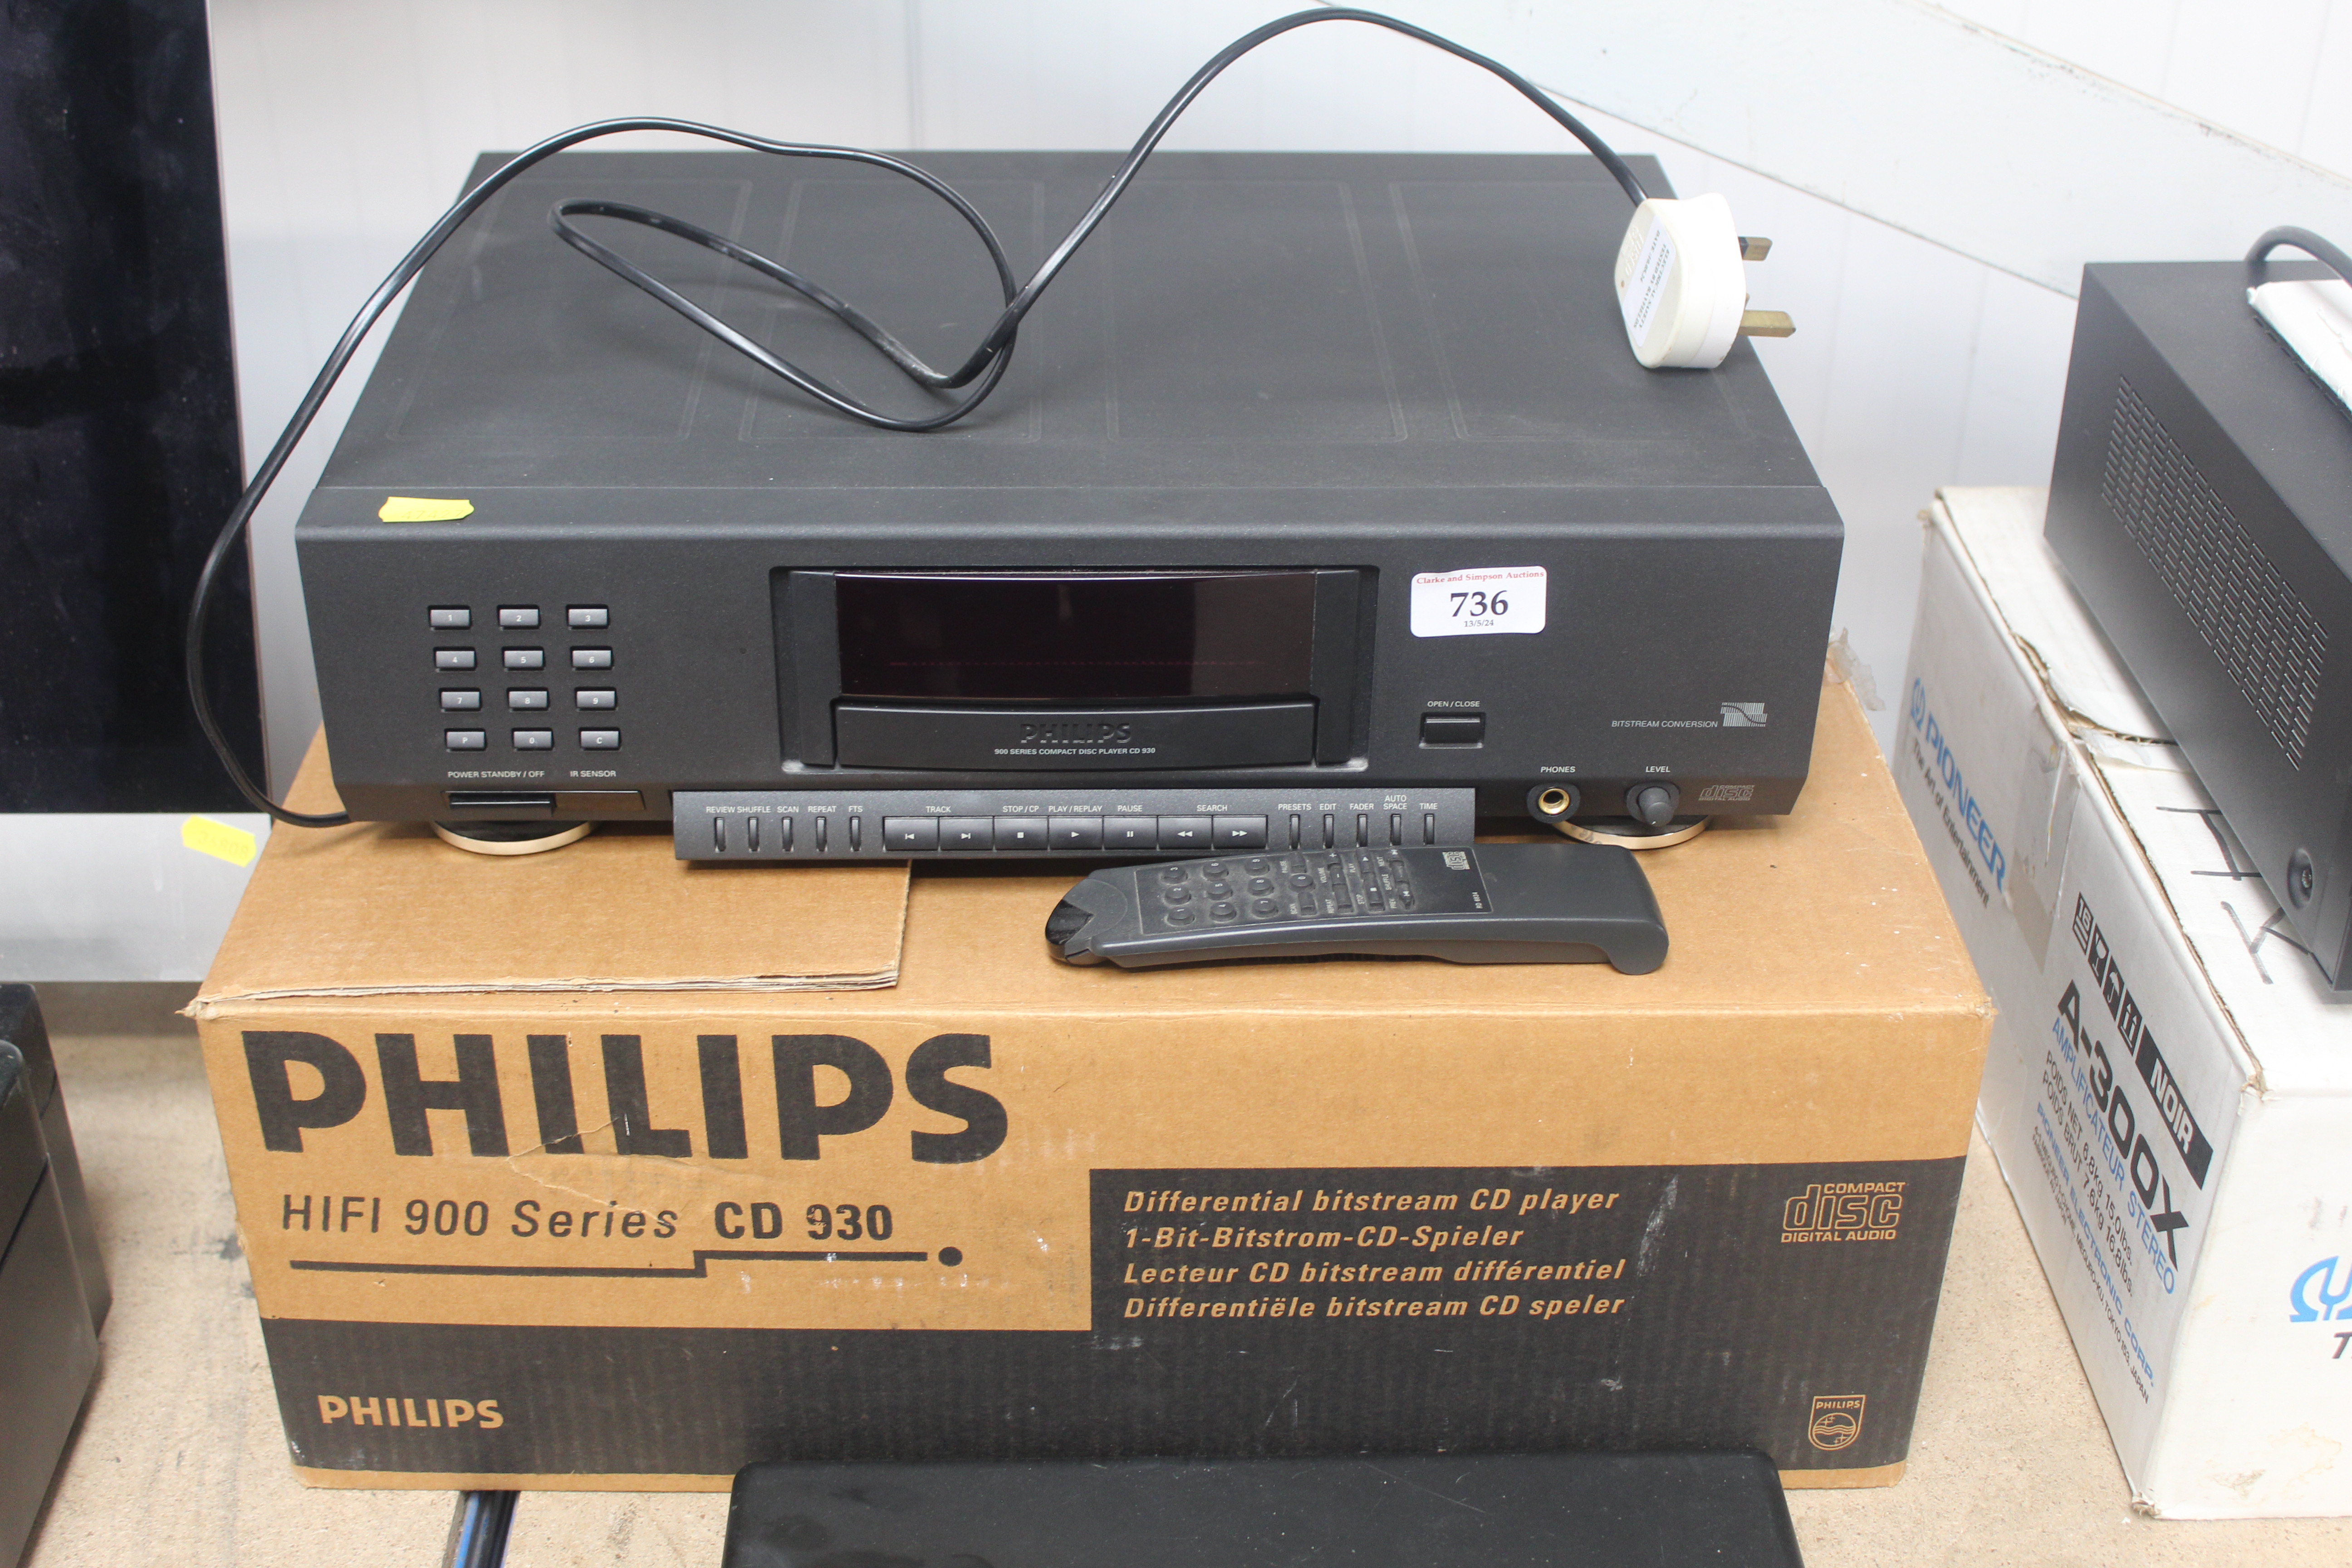 A Phillips compact disc player CD930